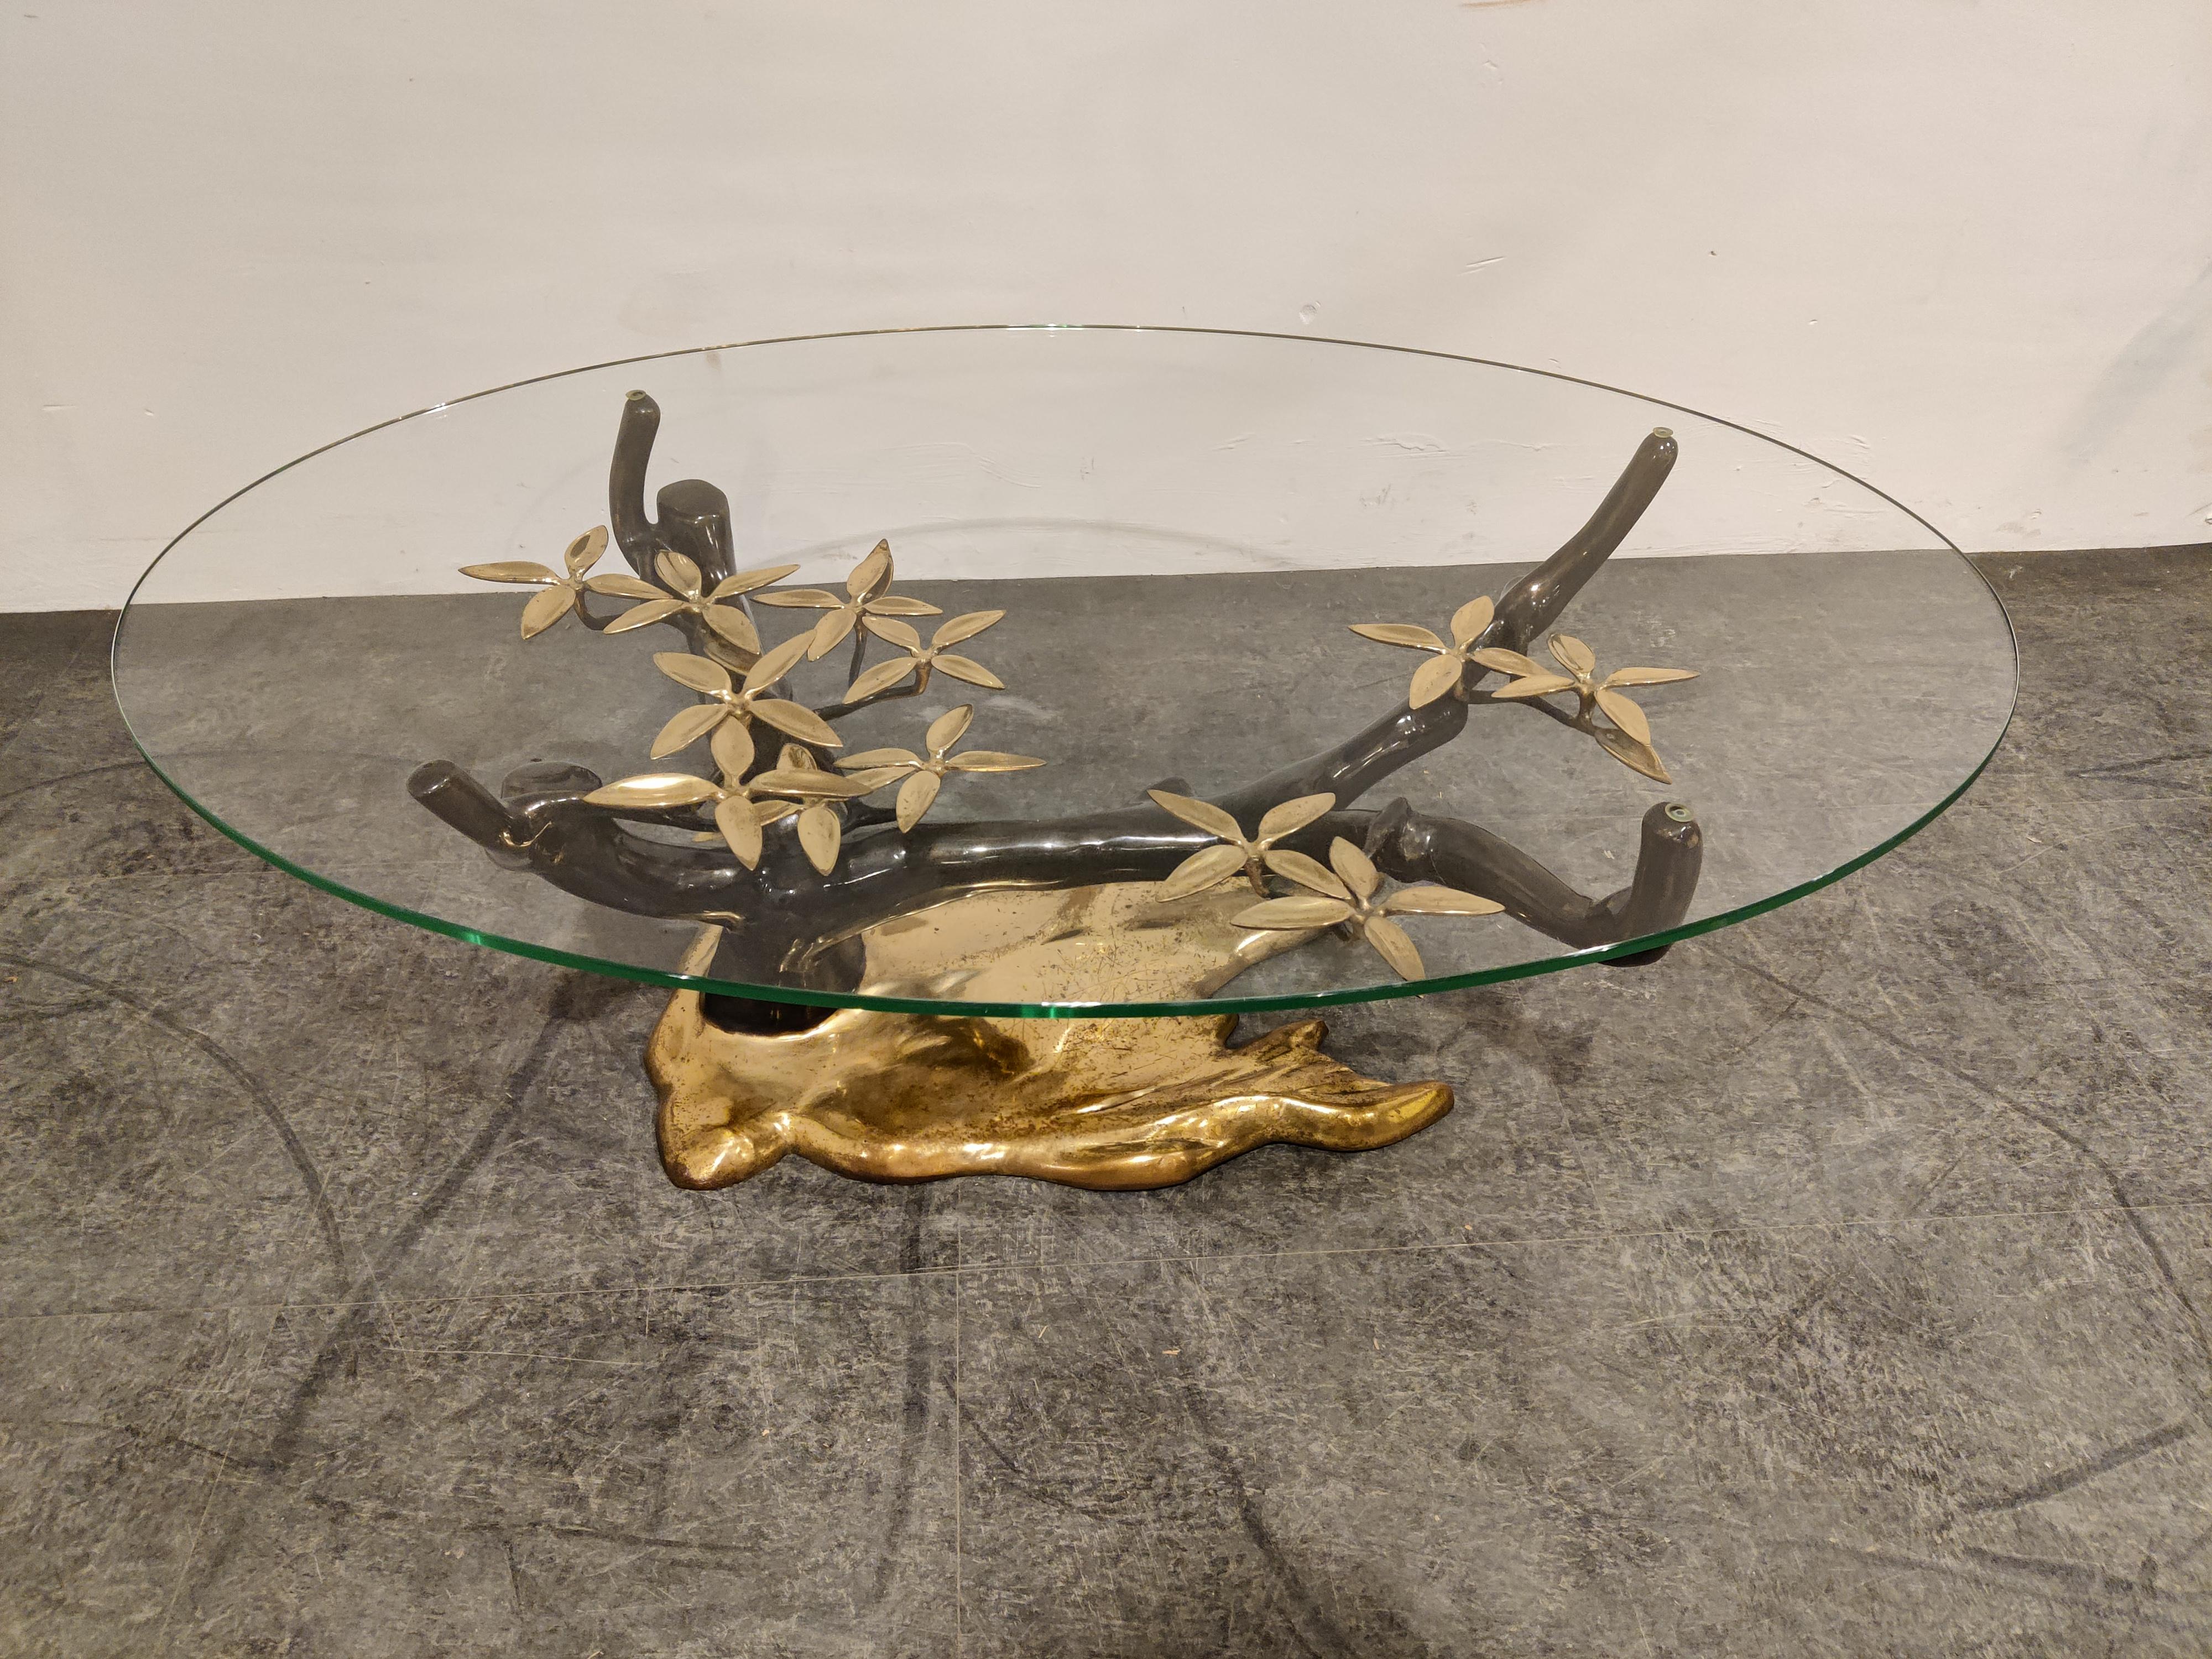 Bronze bonsai coffee table by Willy Daro.

Beautifully manufactured sculpture, comes with a clear glass top.

Slight patina, no damages,

1970s, Belgium

Dimensions:
Height: 42cm/16.53